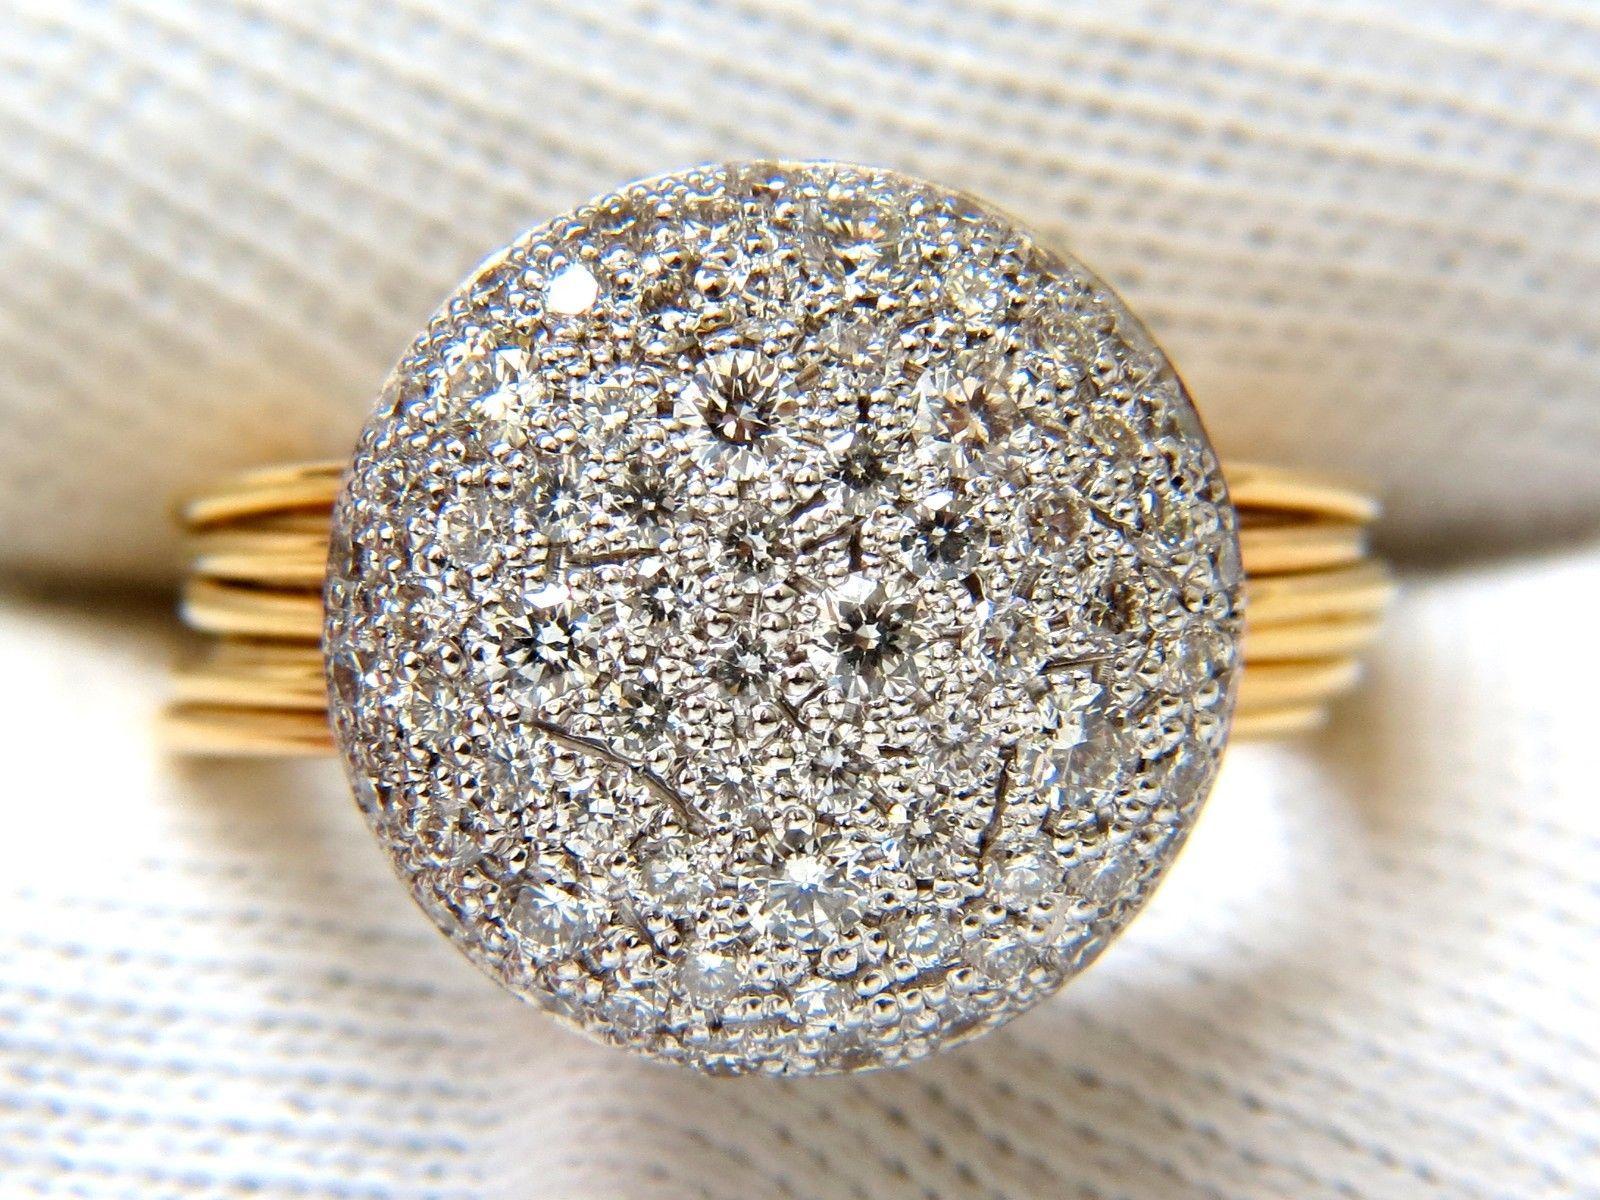 Modern Deco / Multi Band Gorgeous. 

1.36ct diamonds

Round Full cuts

Bead set

G color, Vs-2 clarity

18kt. white & Yellow gold

8.8 Grams

Ring is .60 Inch wide 

.26 Inch depth

current size: 7.25

We may not resize

Completely hand made with